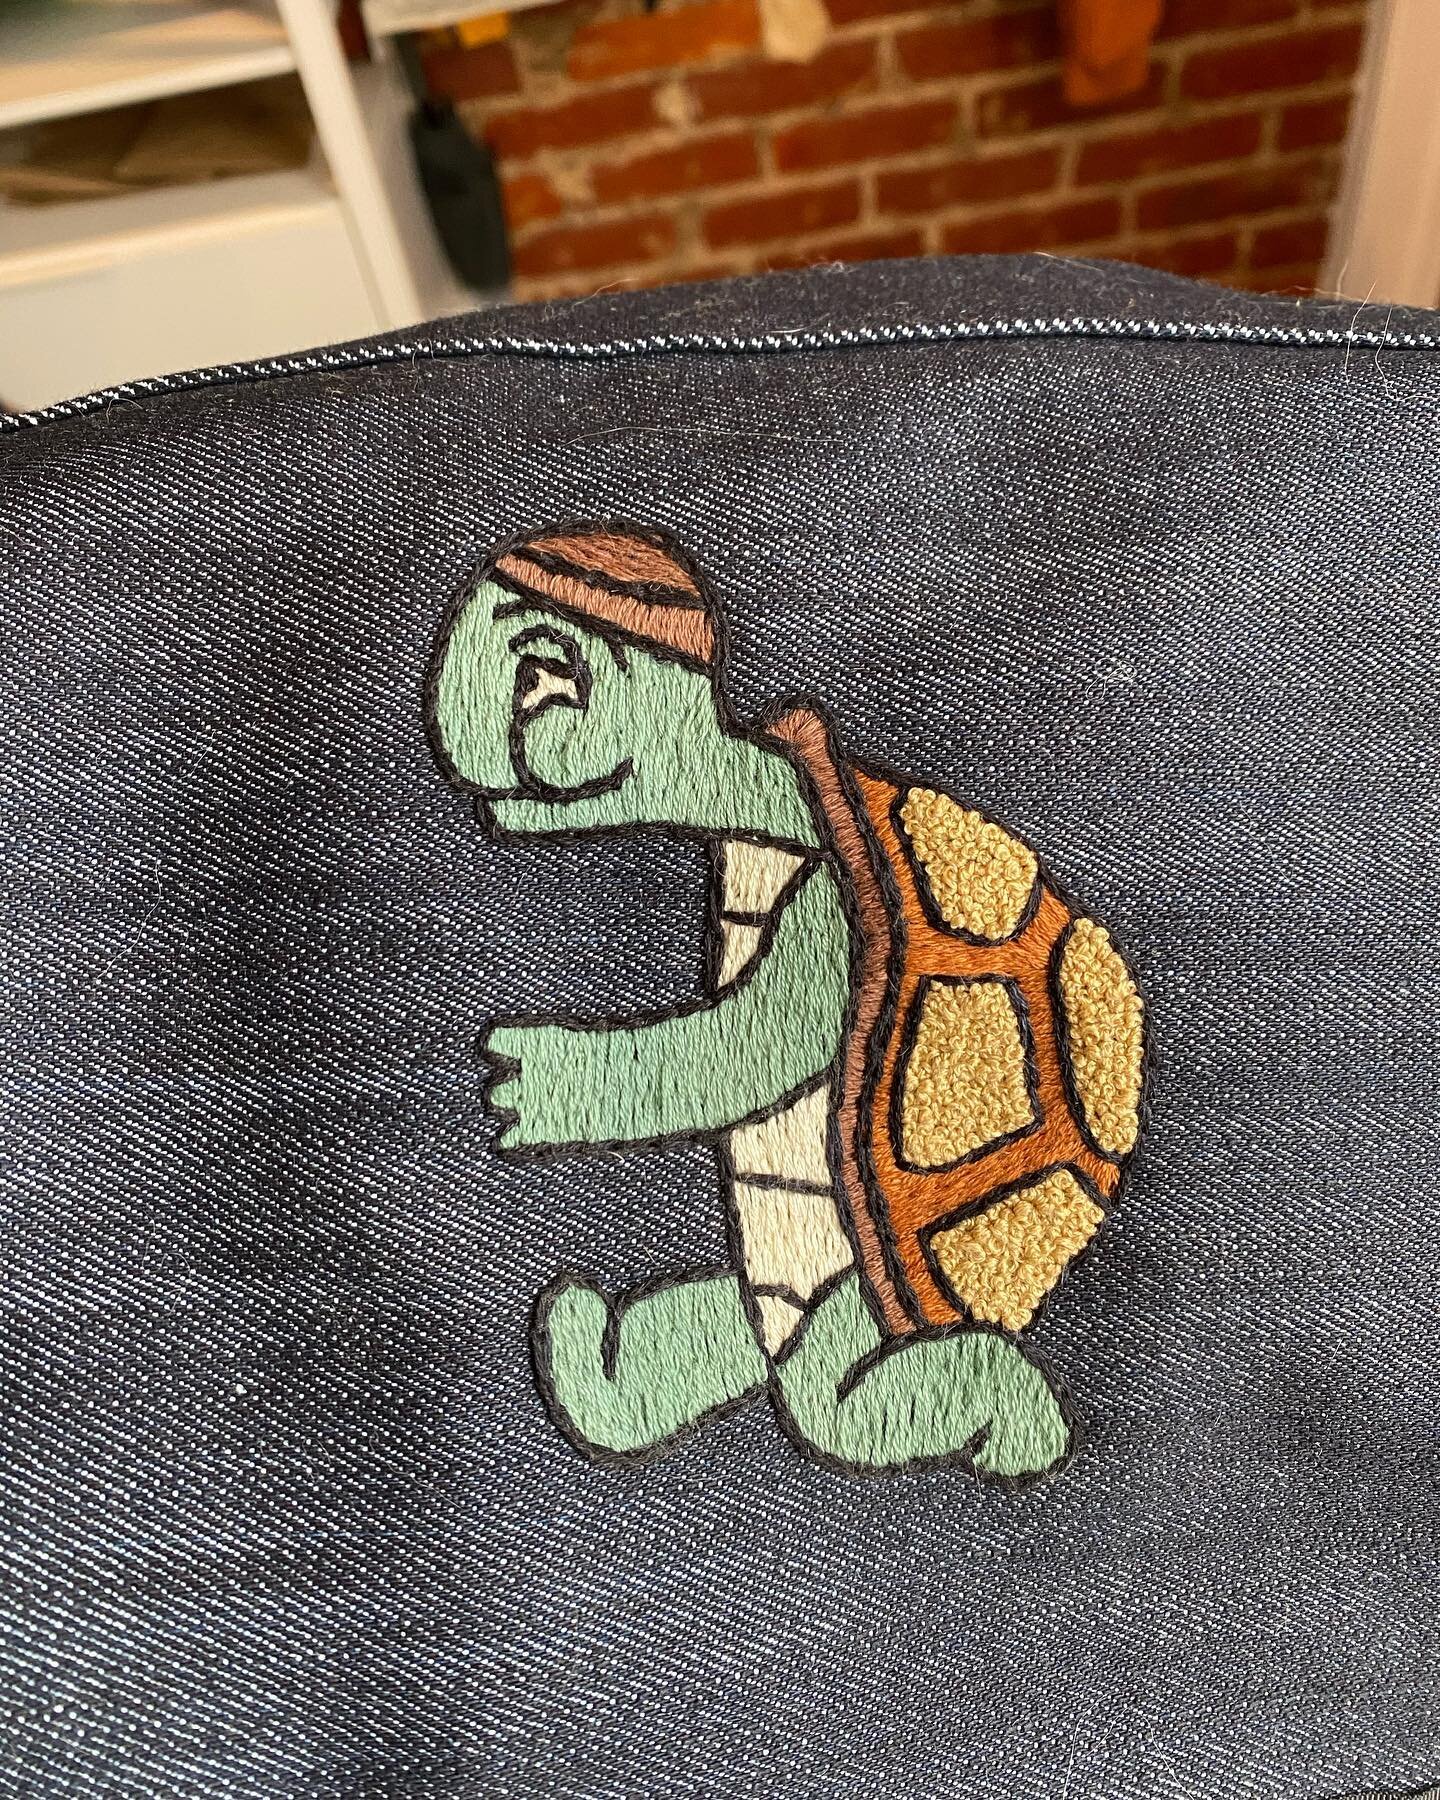 Just finished embroidering this turtle for my buddy @breckbuilt who built us these incredible shelves. Philly people check him out!